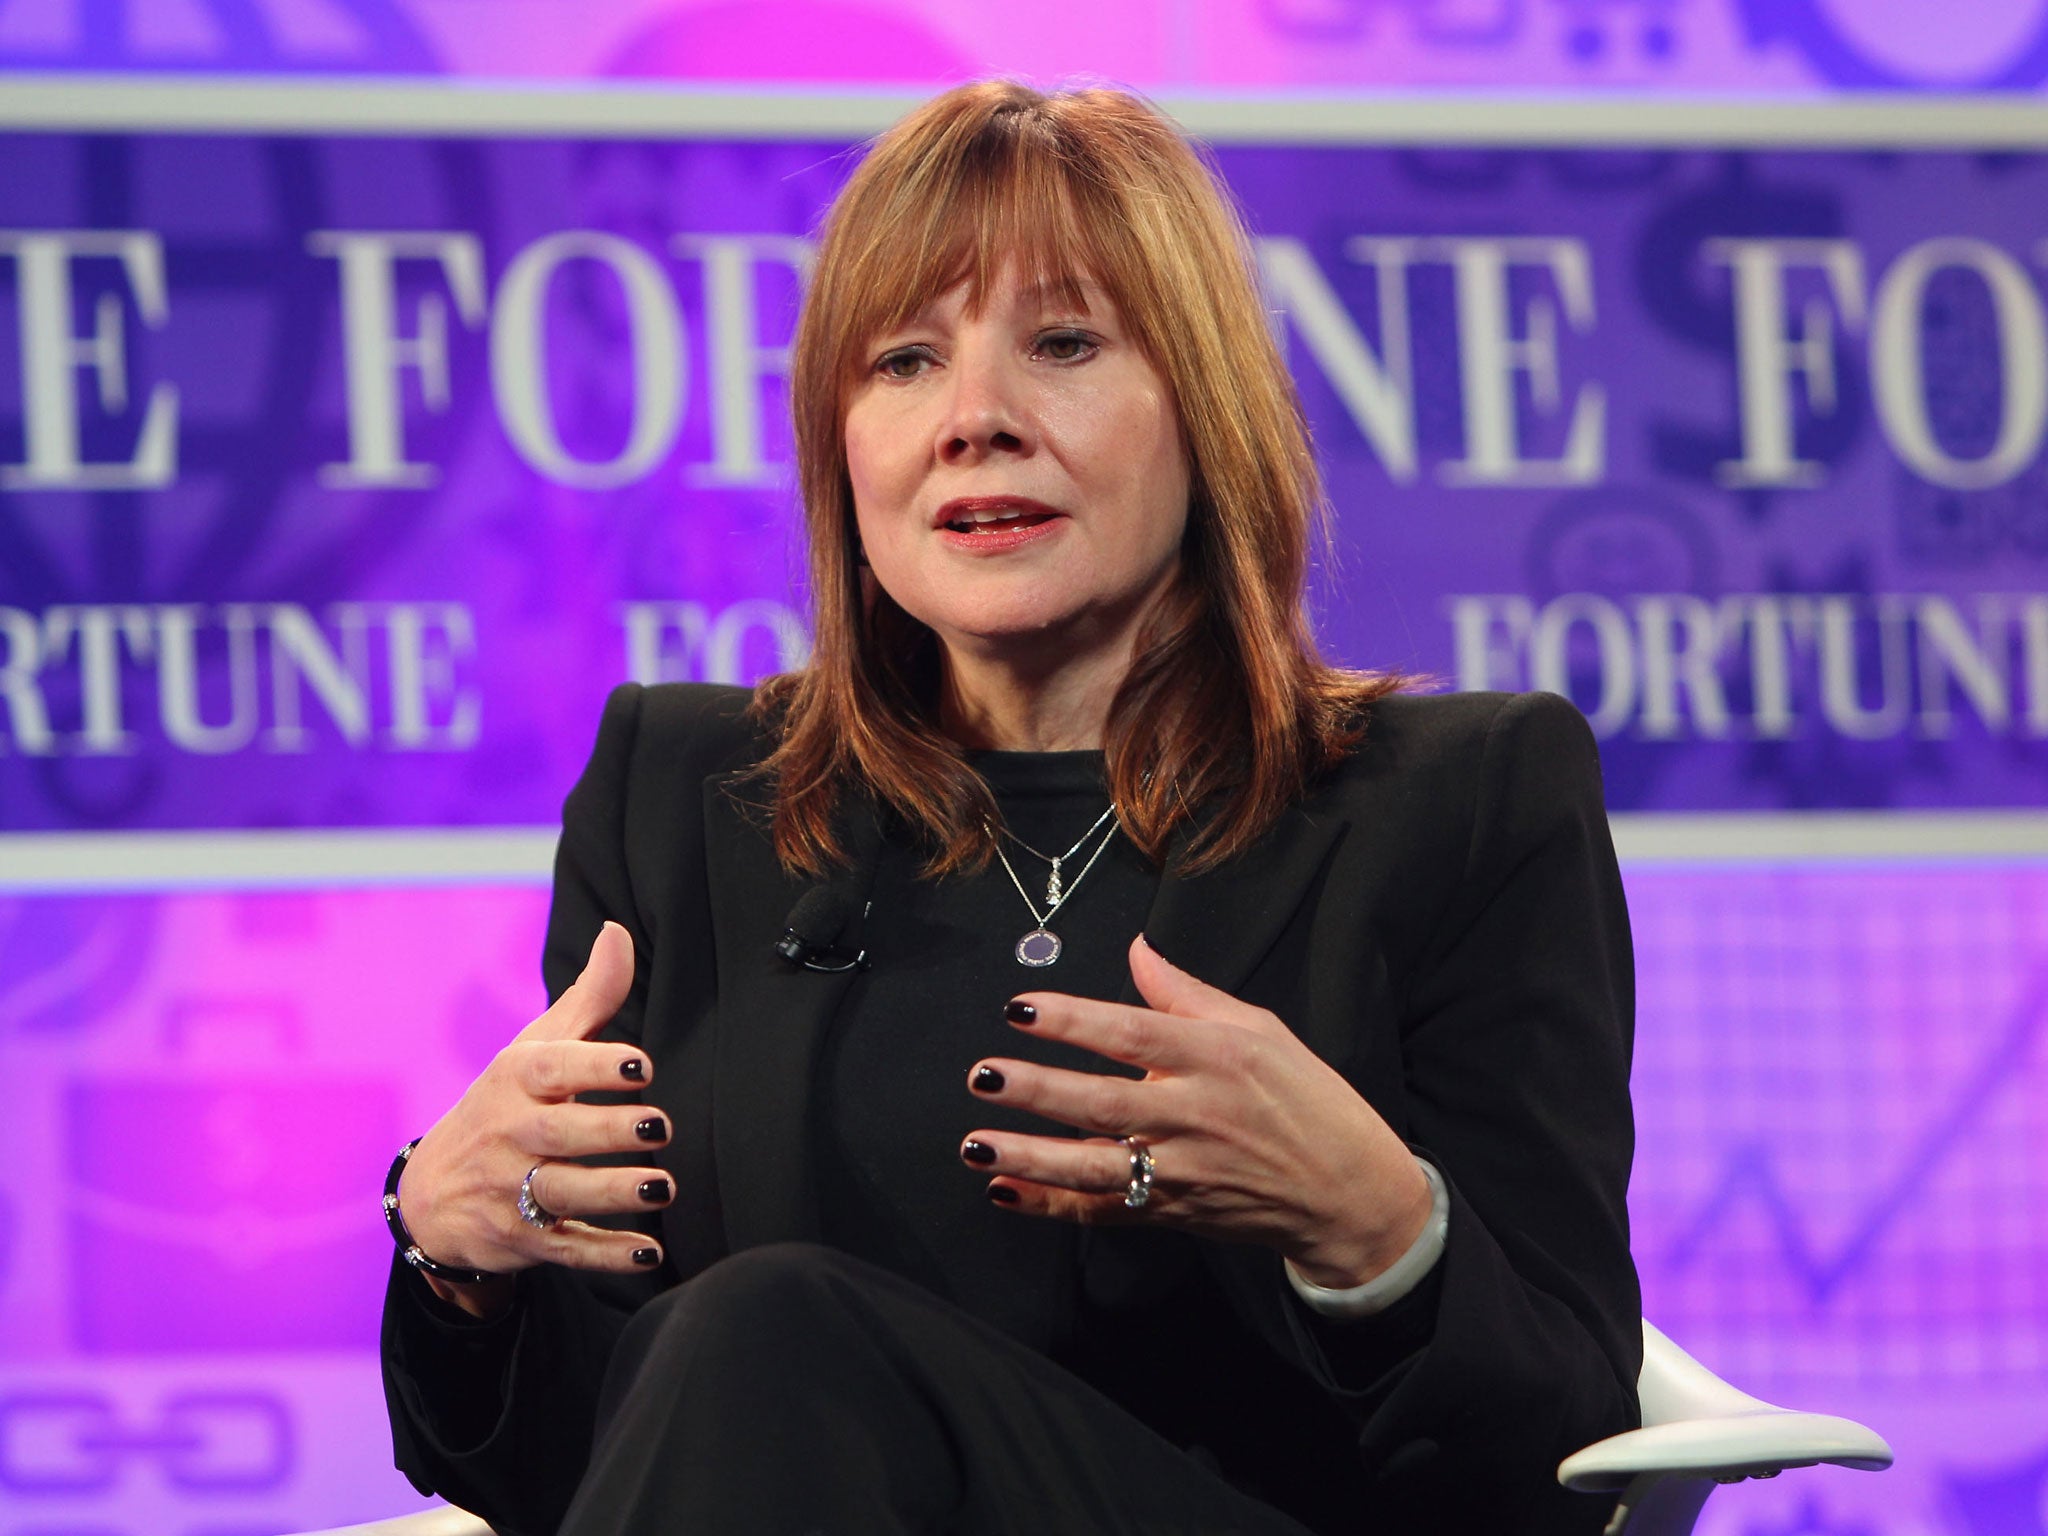 General Motor's new chief executive Mary Barra